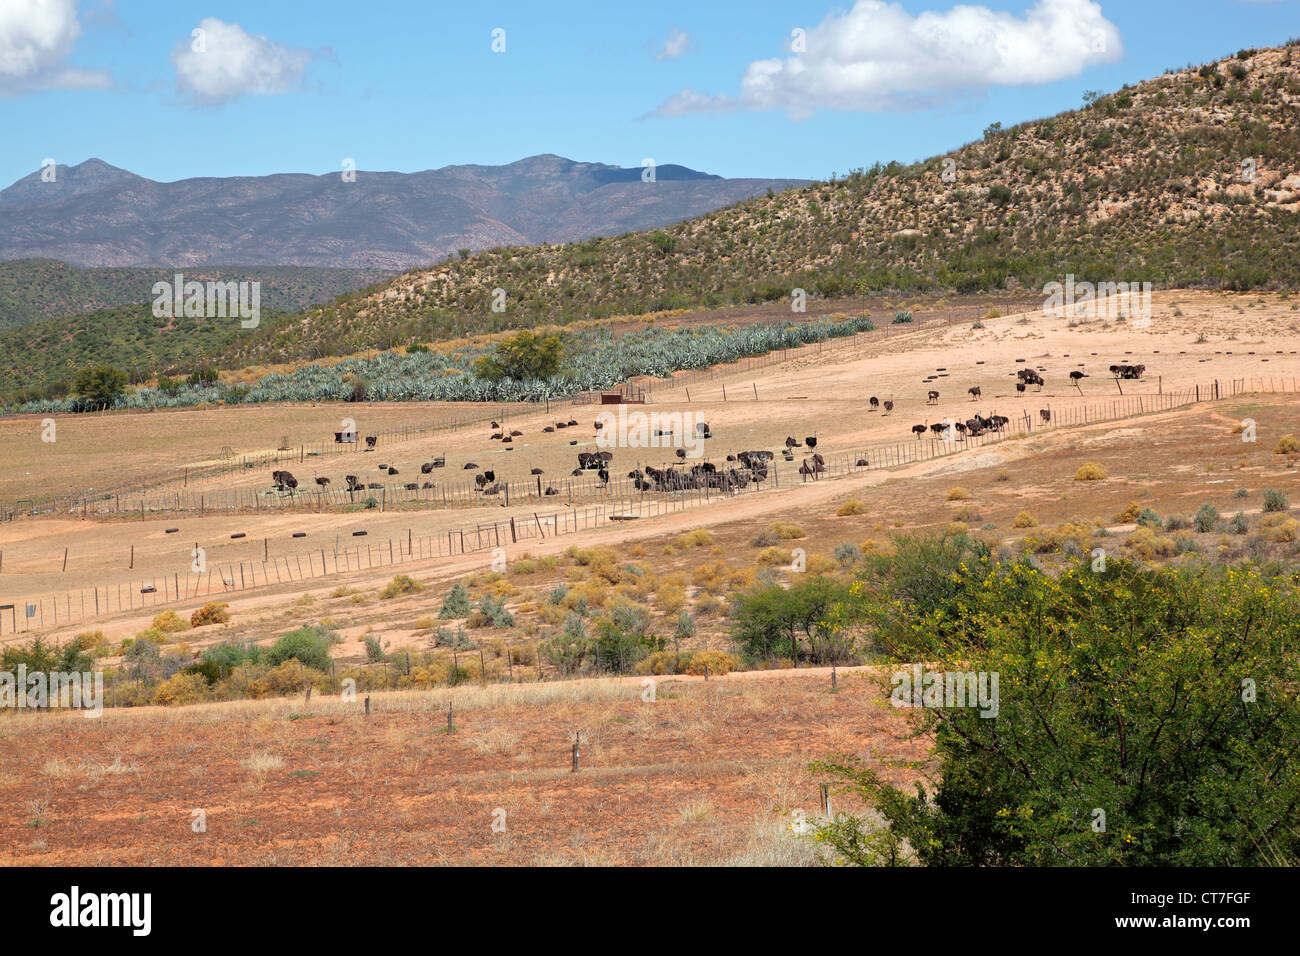 Landscape view of an ostrich farm, Karoo region, Western Cape, South Africa Stock Photo